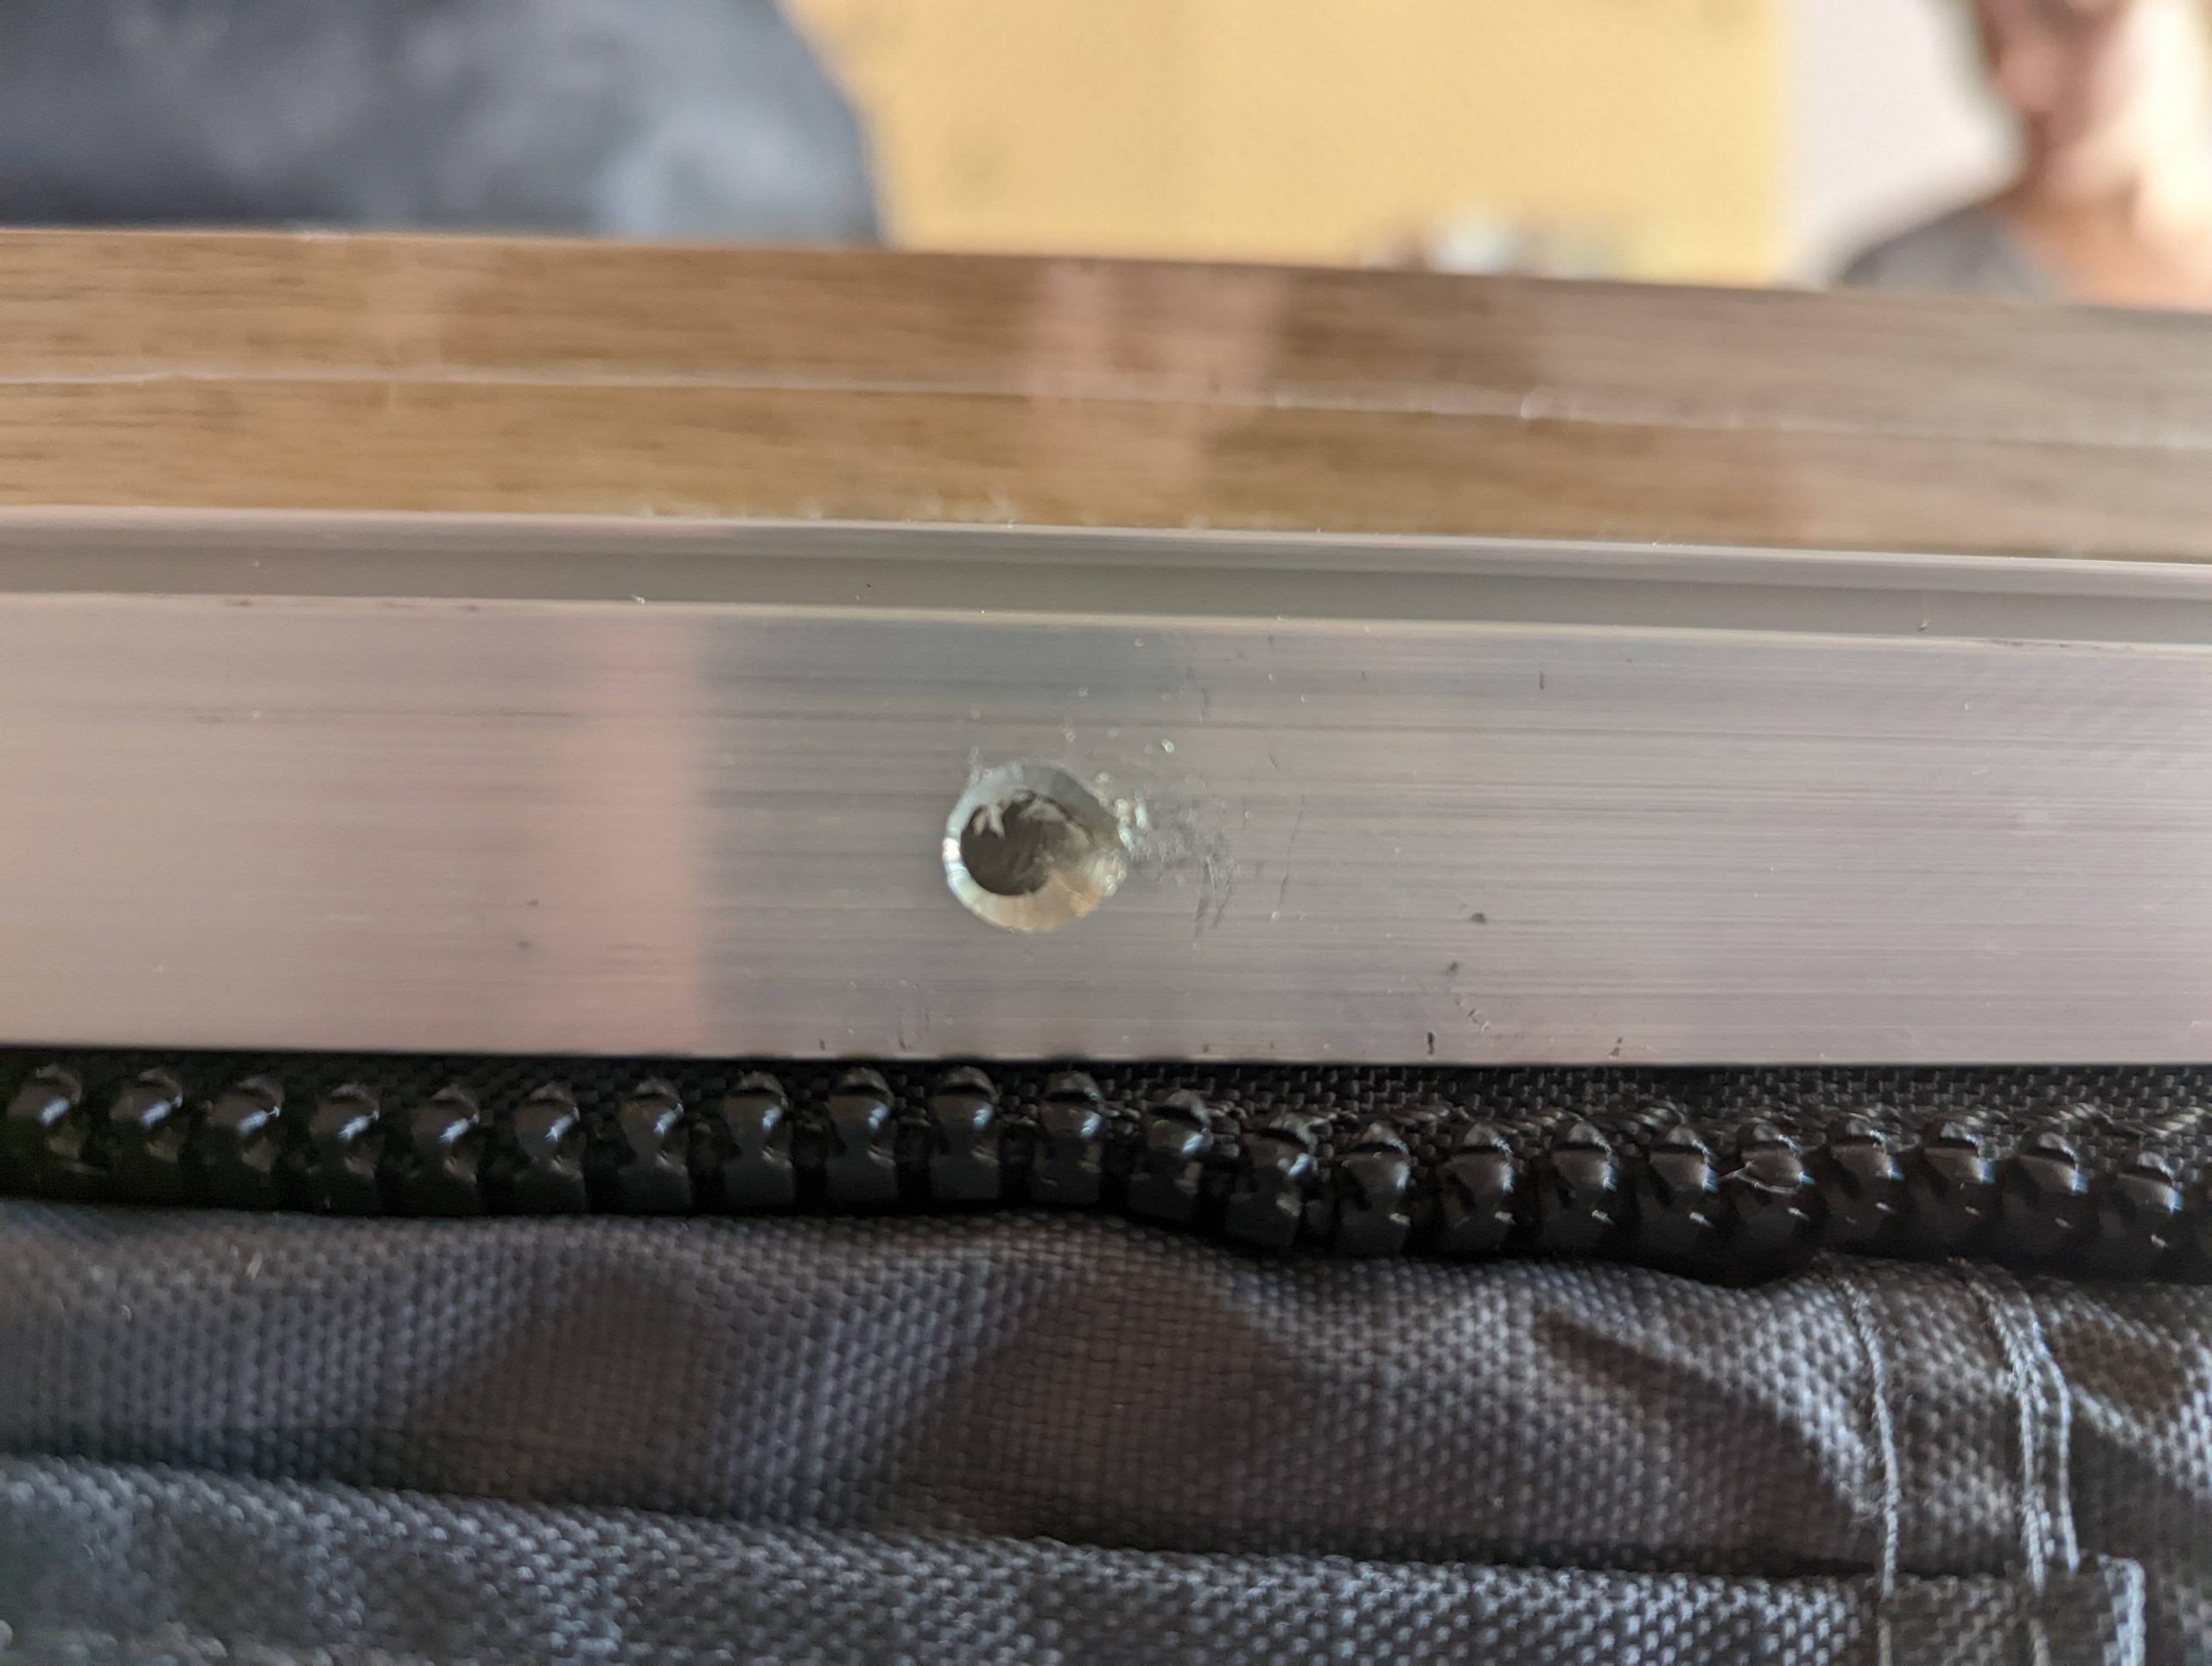 Can anyone tell me if their Smittybilt has these poorly machined holes along the outer aluminum frame? : overlanding